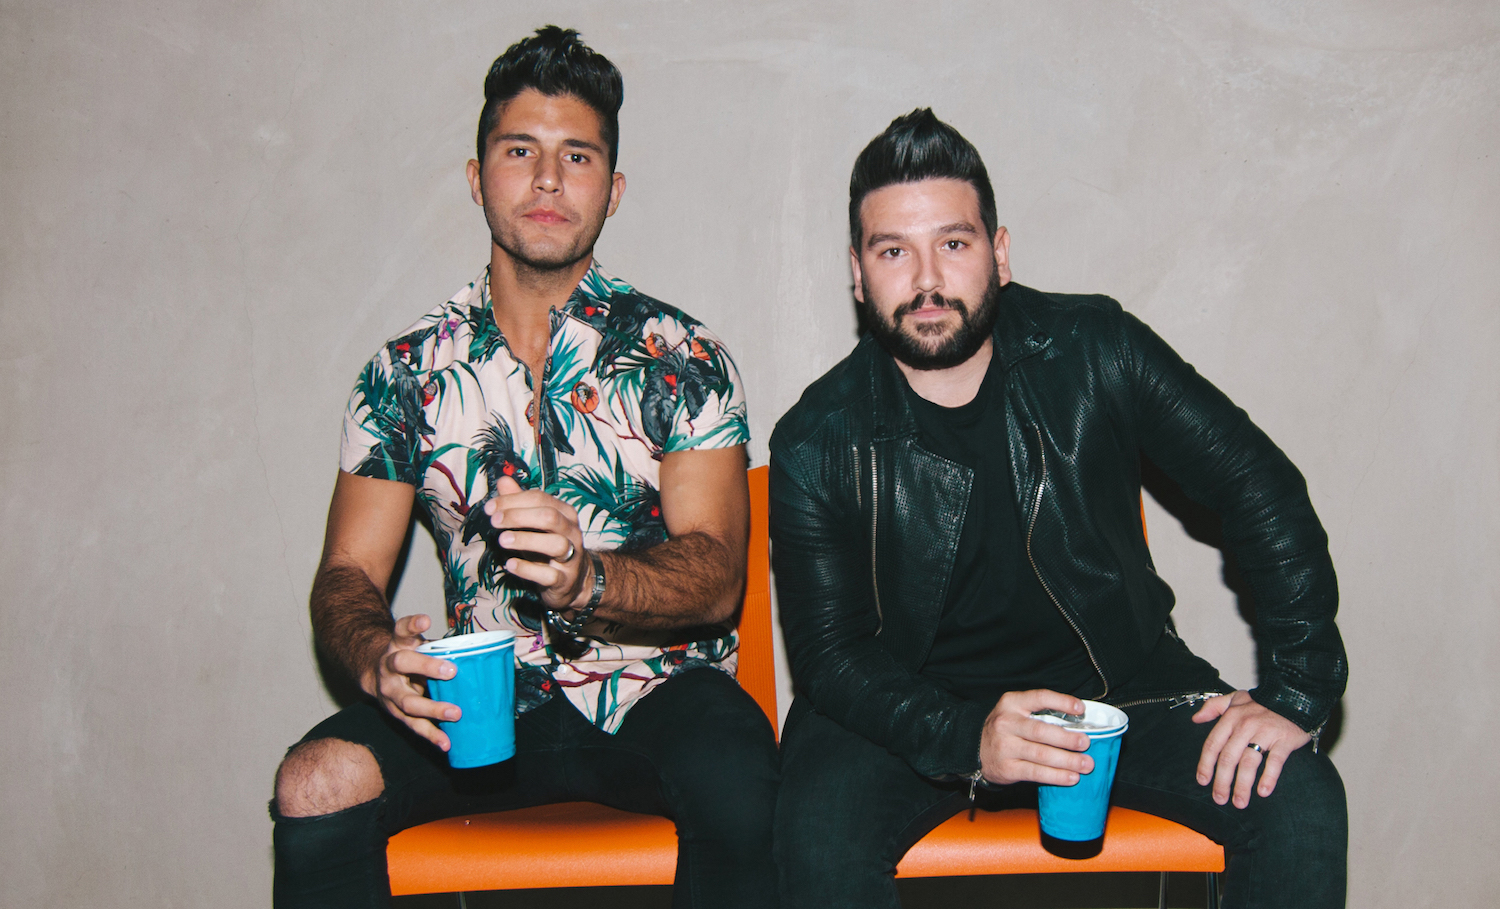 Dan + Shay Showcase Their Harmonies With Acoustic Version of “Tequila”